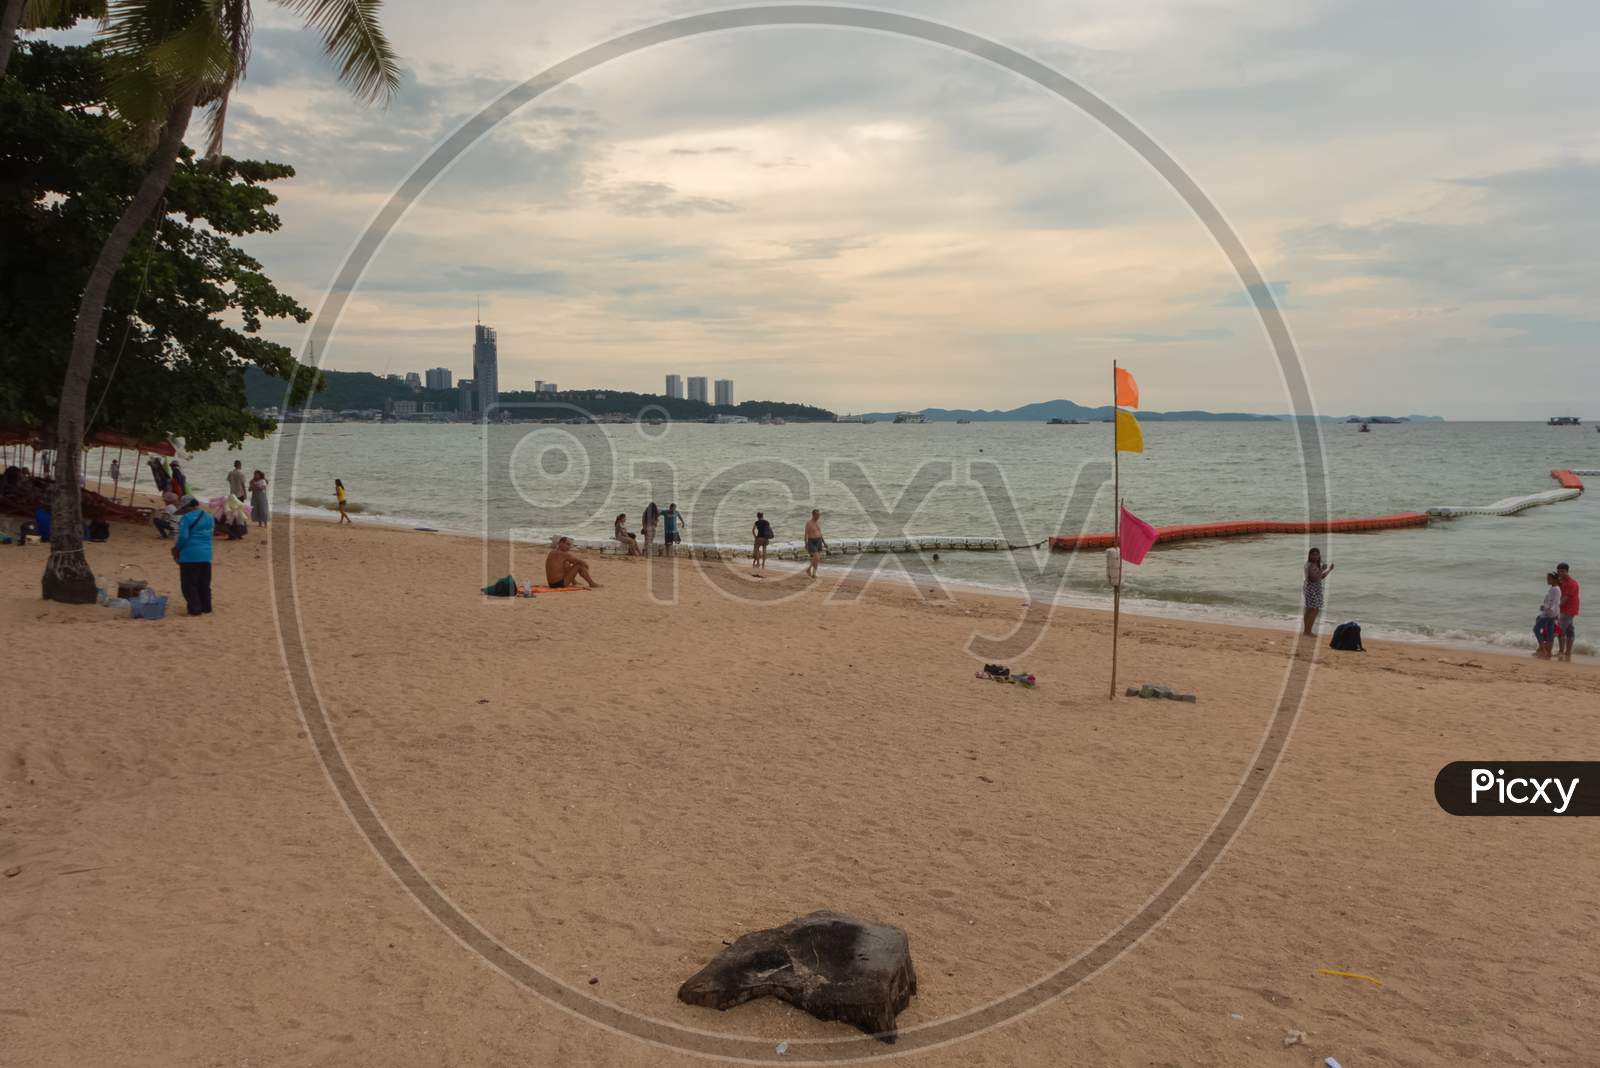 Pattaya,Thailand - October 09,2016: The Beach On A Late Afternoon.It'S A Meeting Point For Starting Boat Trips To Islands Like Koh Larn And Koh Sak.